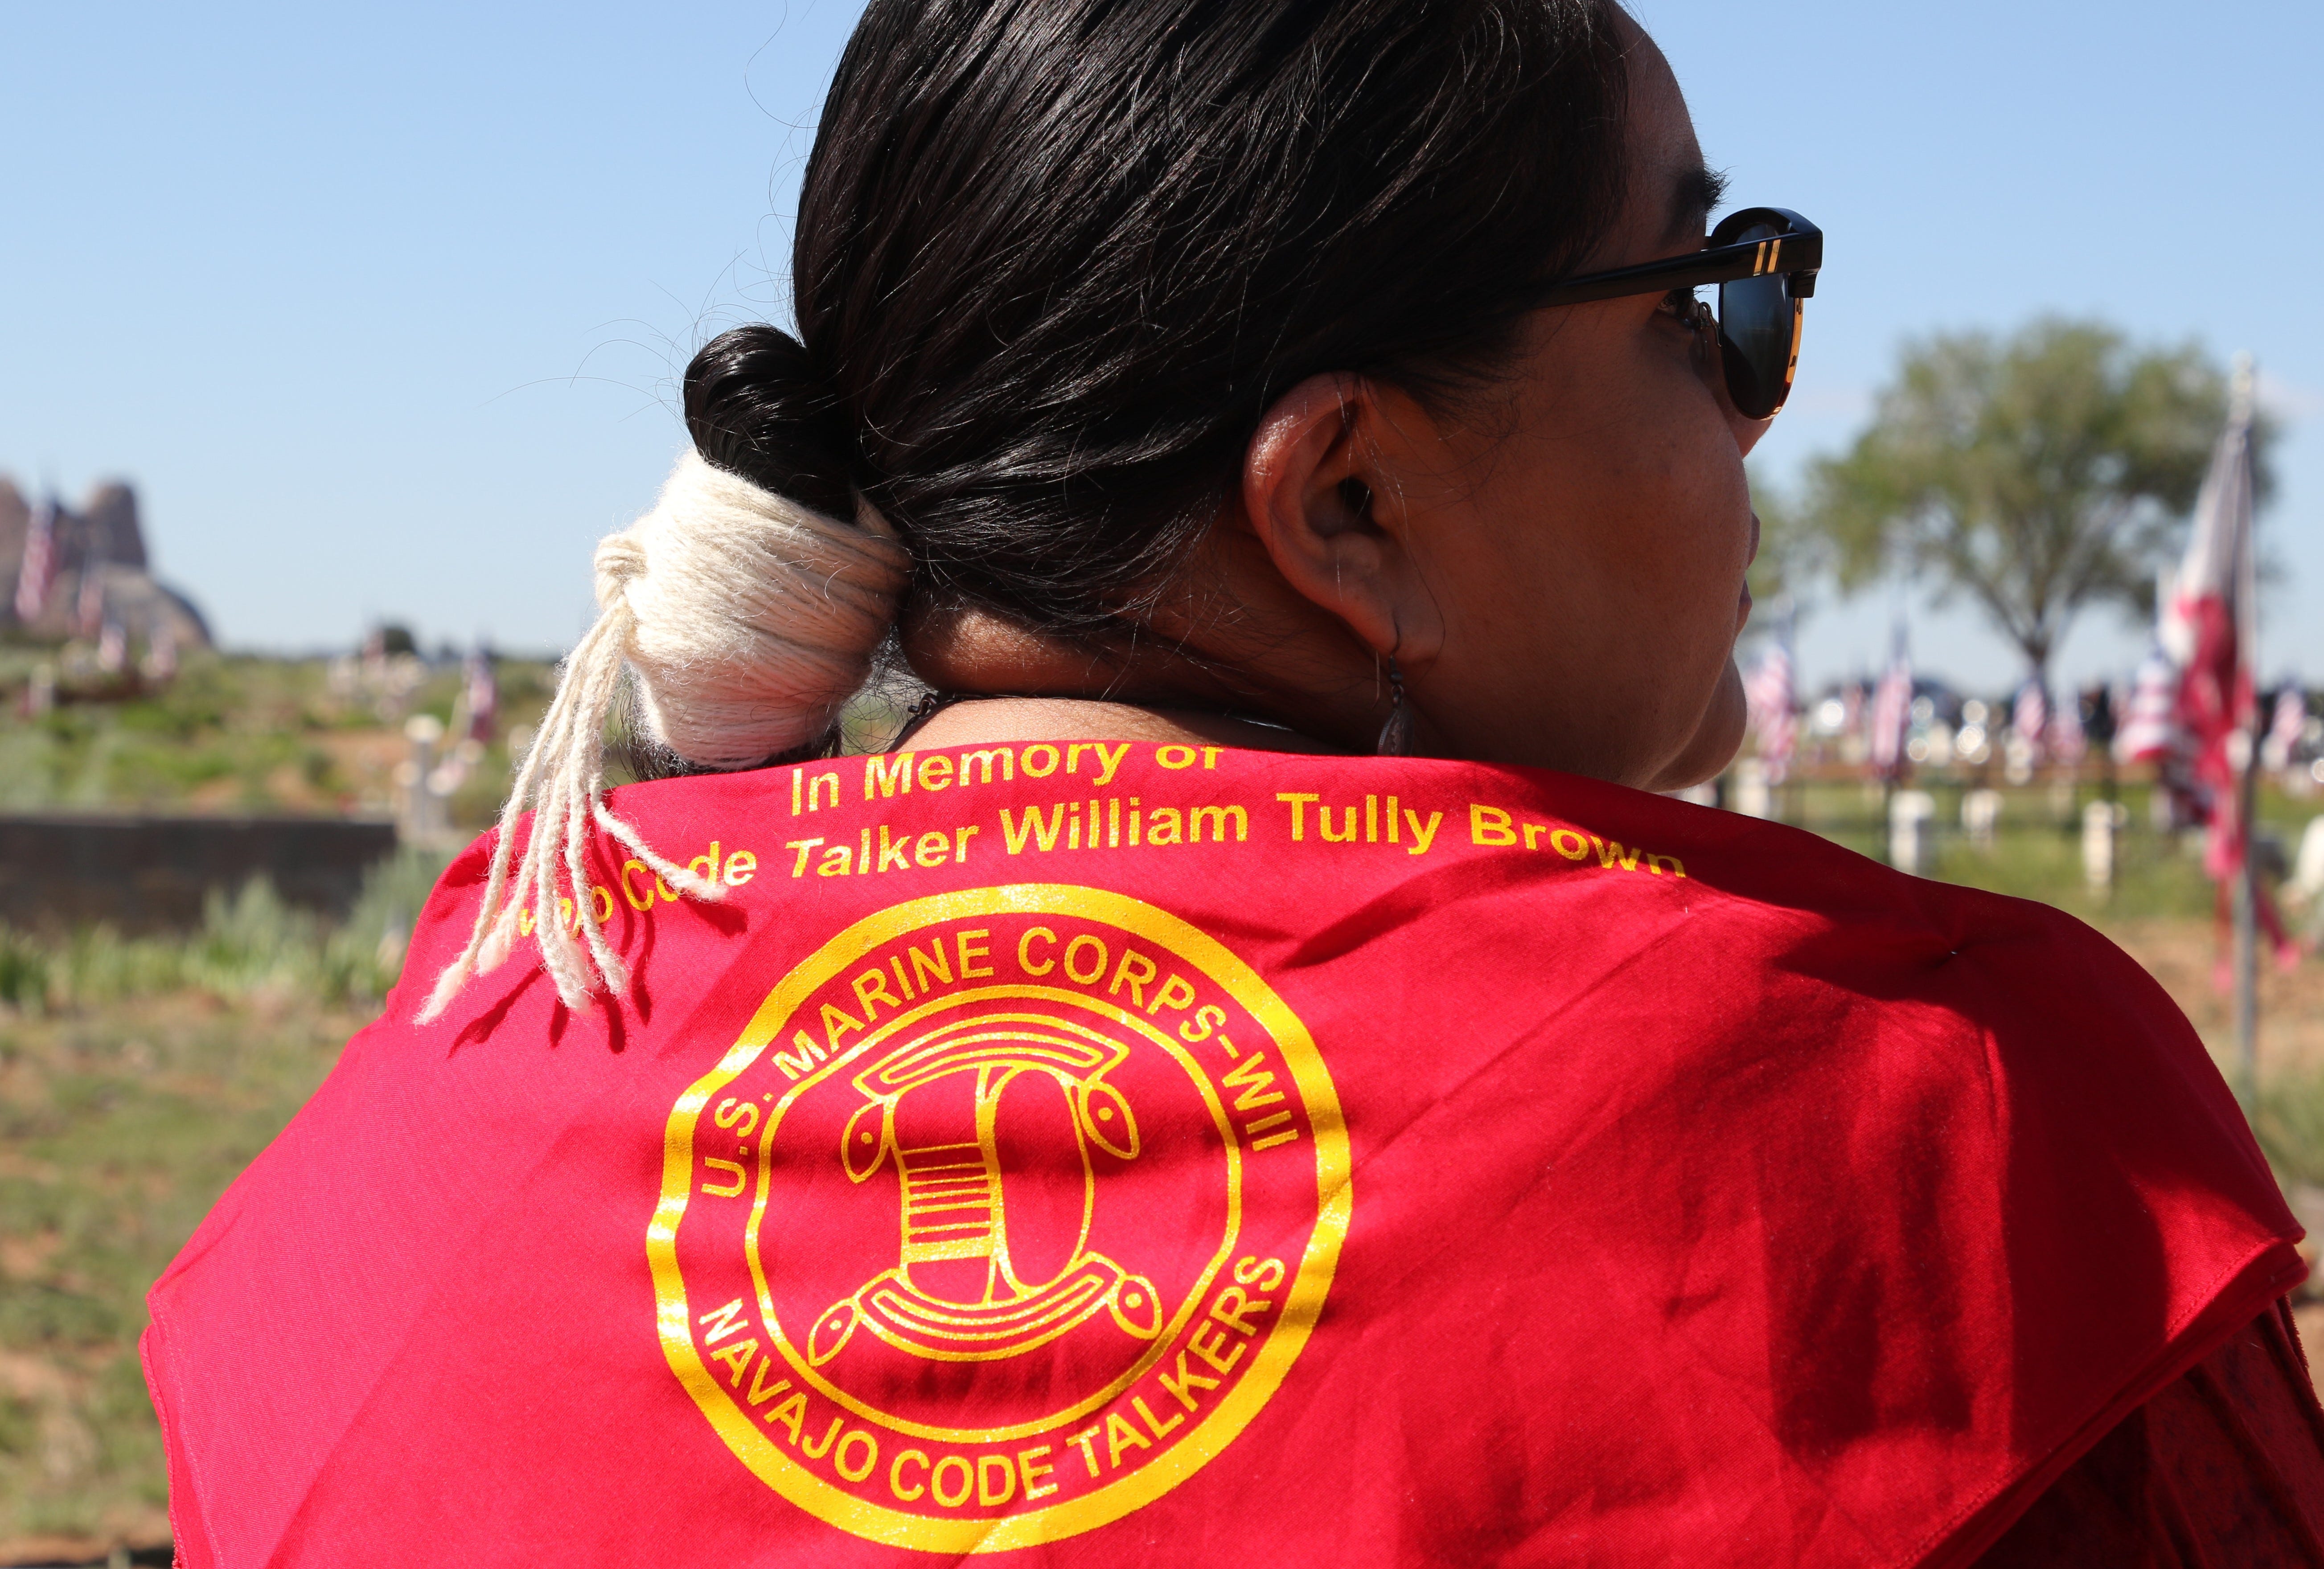 Nikki Tully wears a red scarf family members received at the June 6 memorial service for Navajo Code Talker William Tully Brown Sr. at the Fort Defiance Veterans Cemetery in Fort Defiance, Ariz.